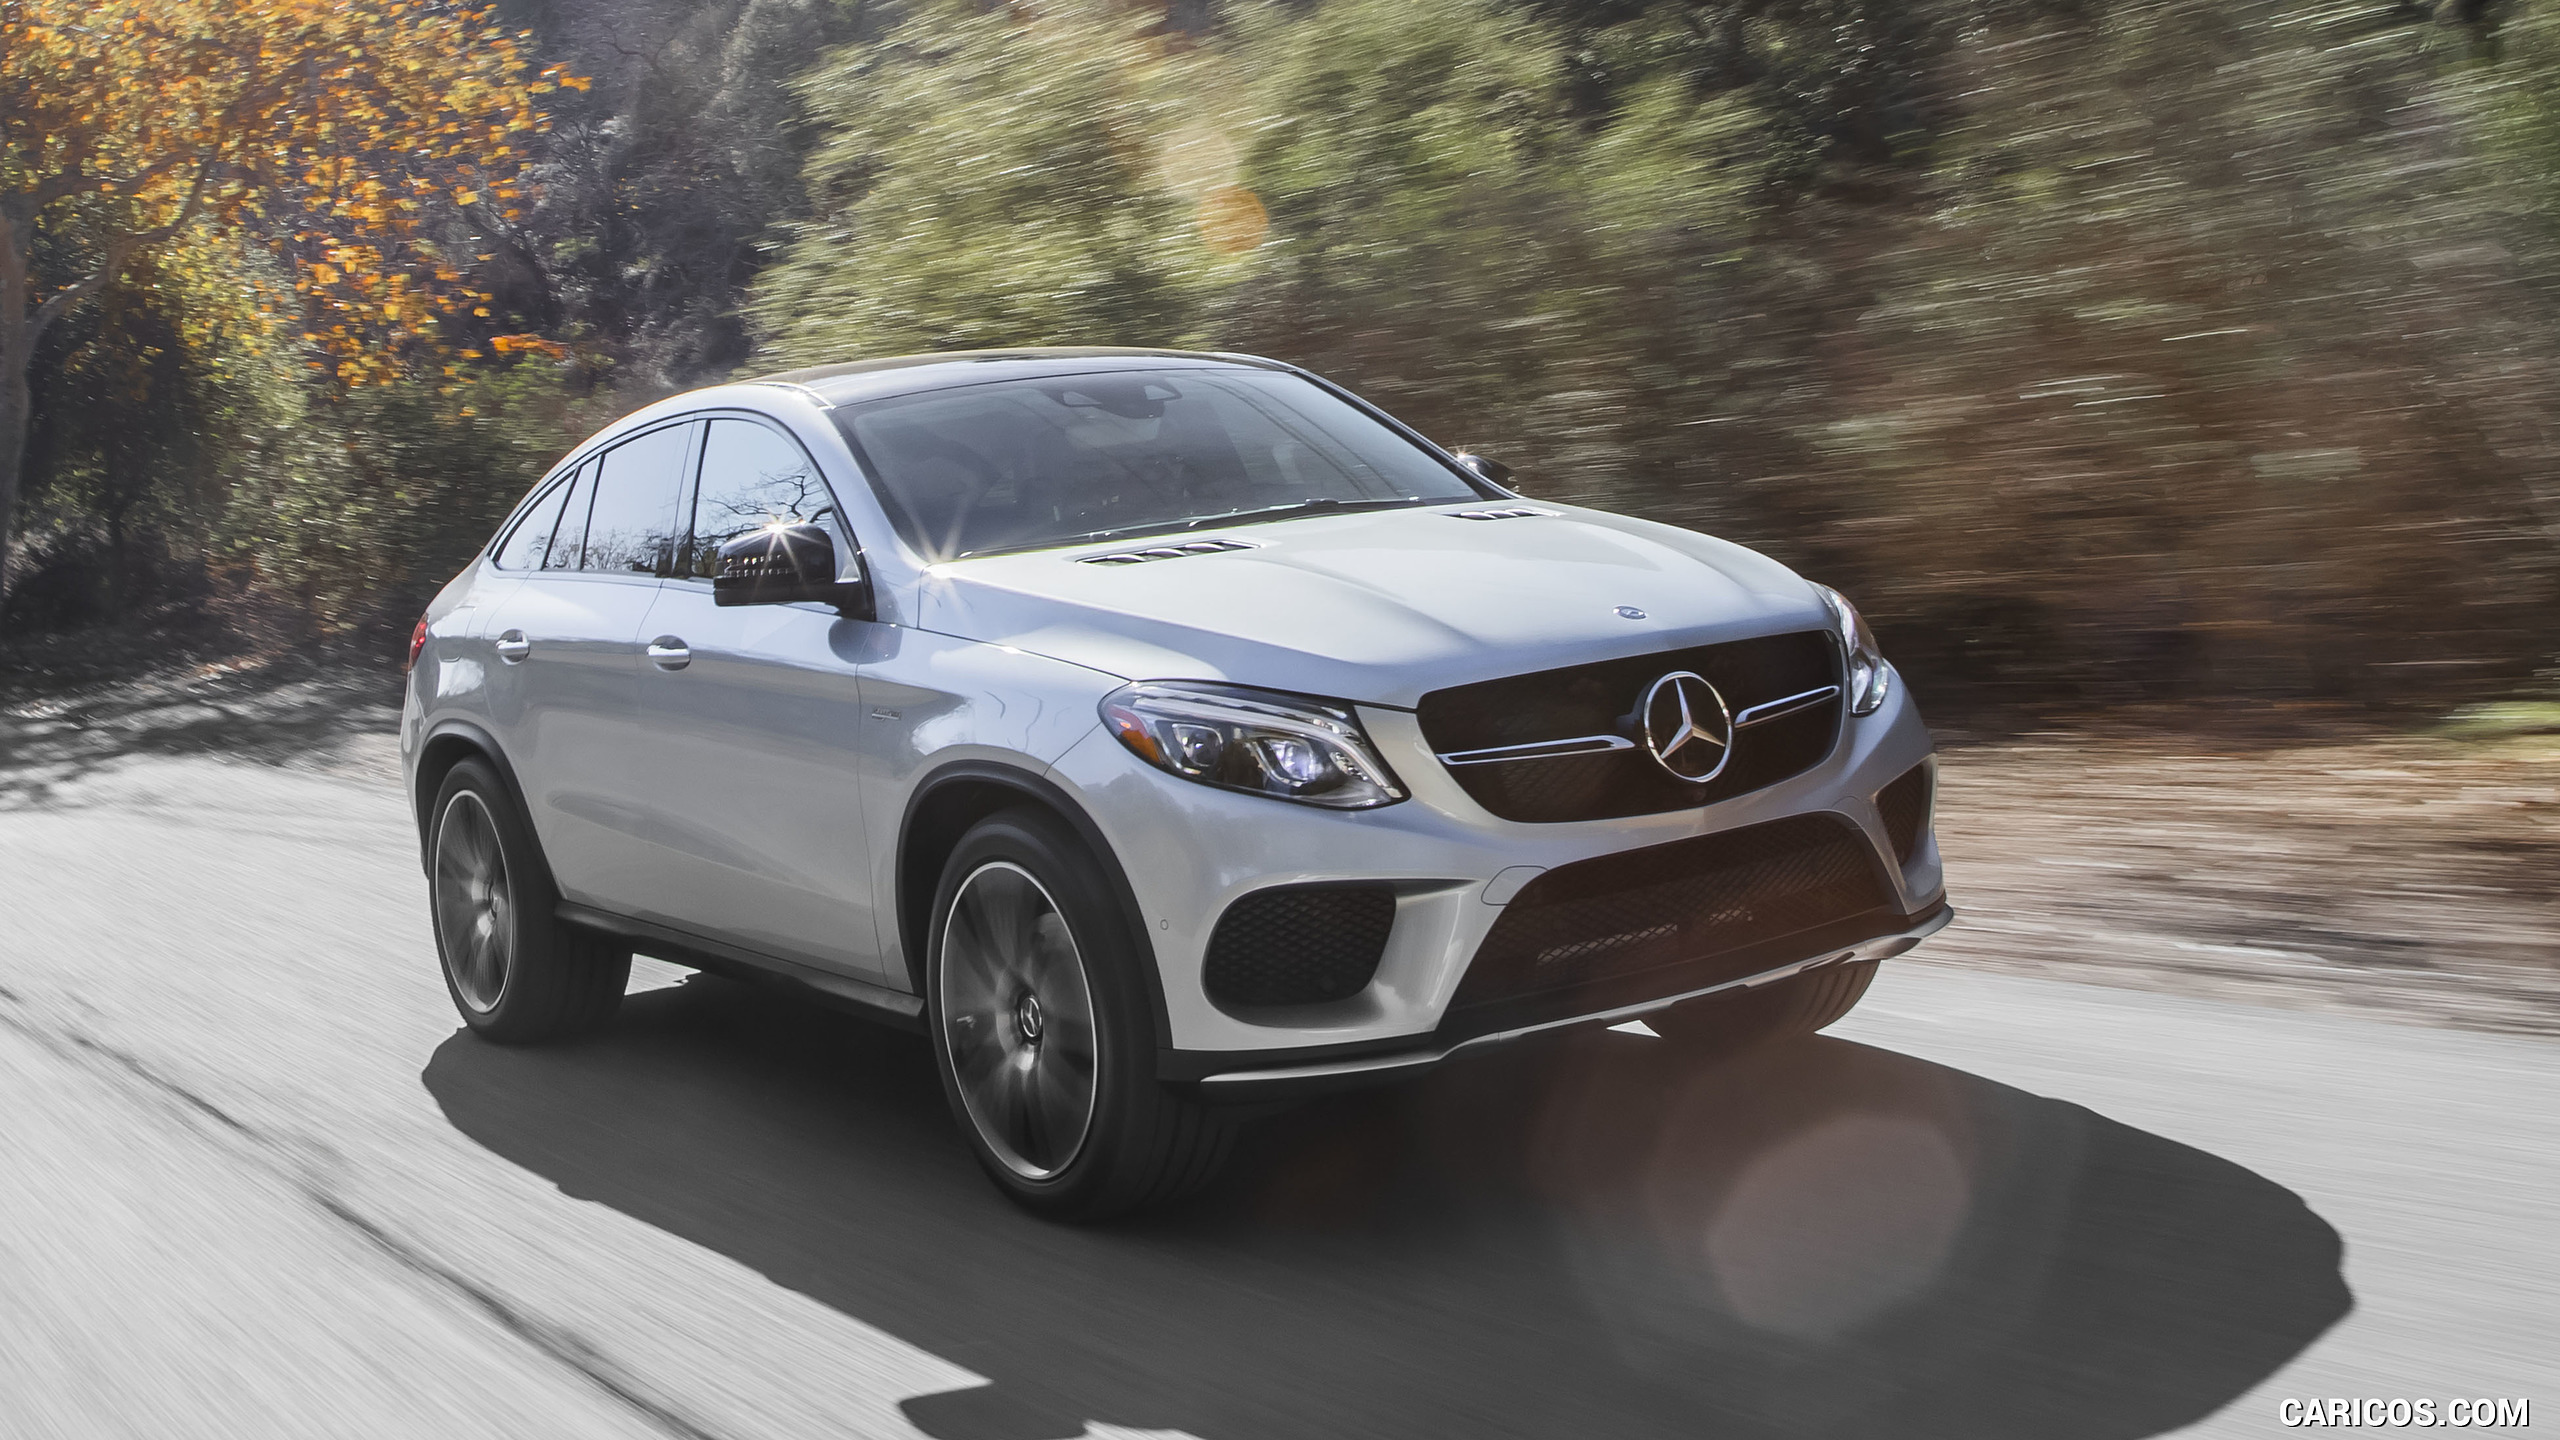 2017 Mercedes-AMG GLE 43 Coupe (US-Spec) - Front Three-Quarter, #2 of 29